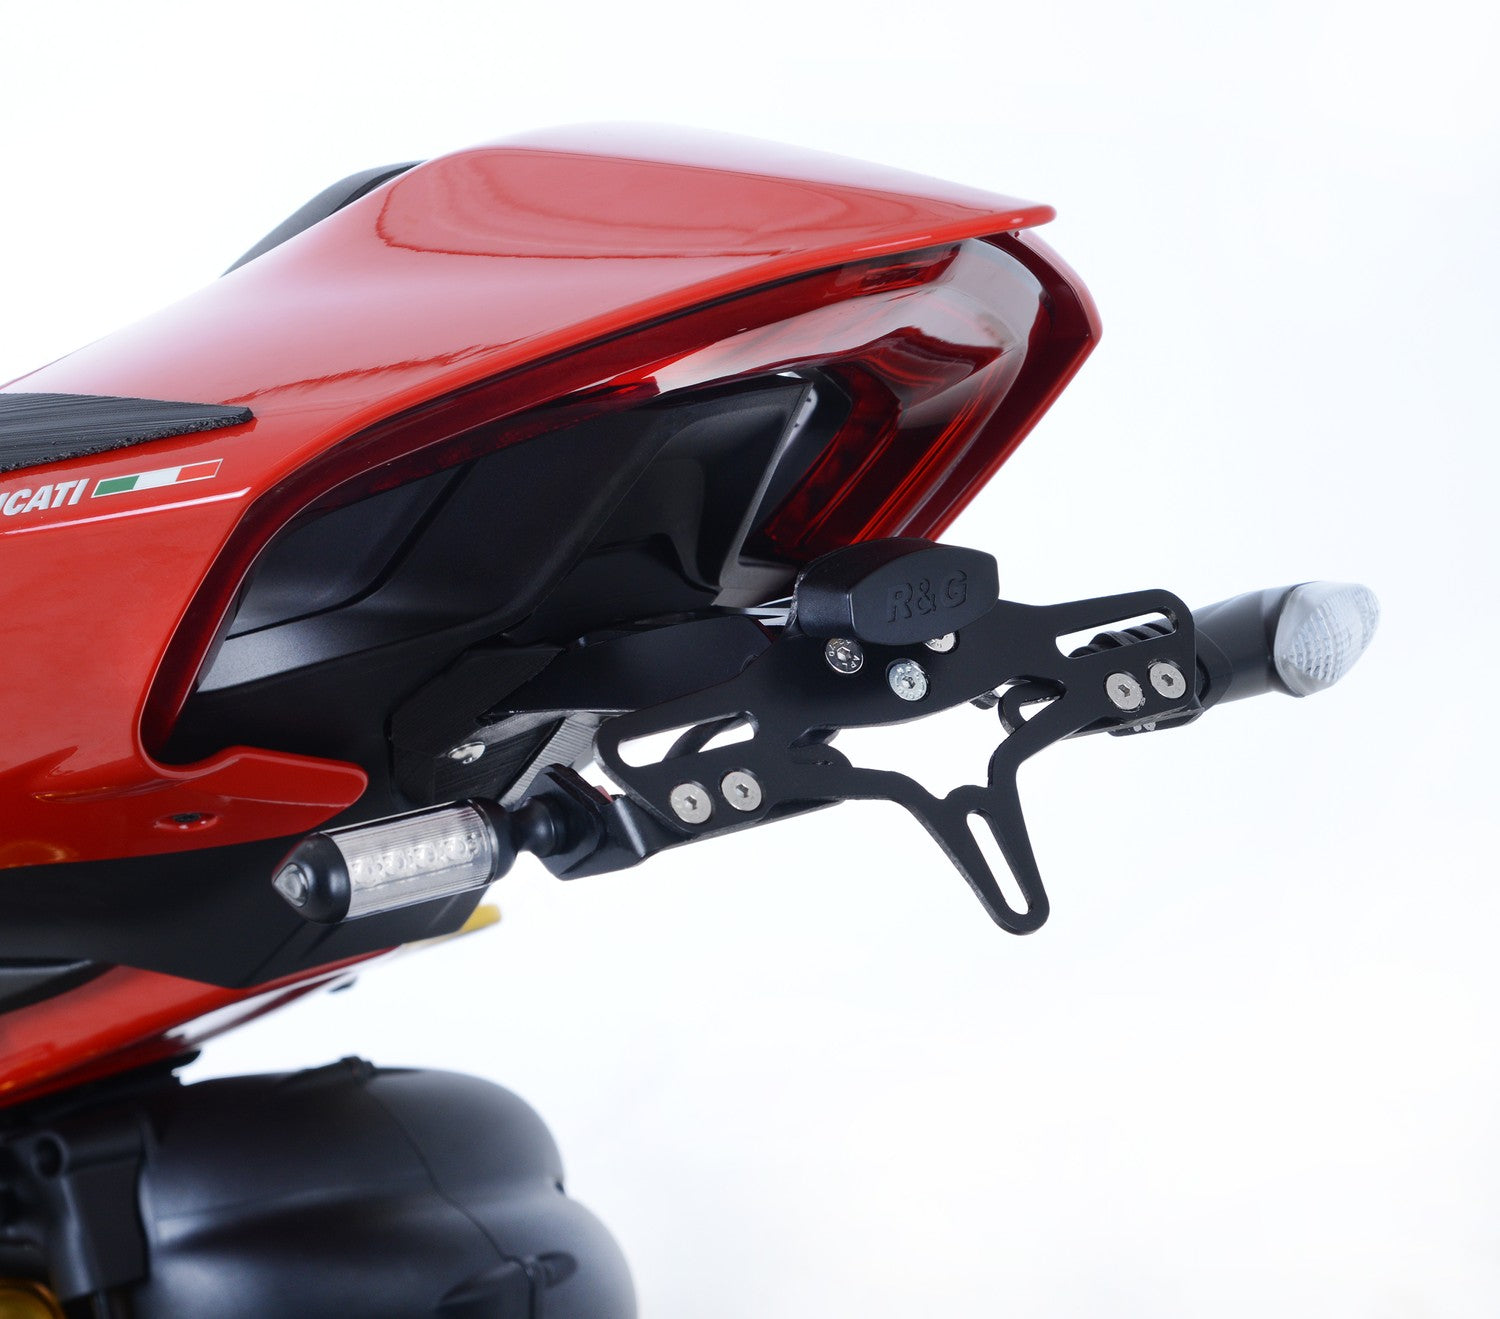 R&G Tail Tidy for Ducati Streetfighter V4